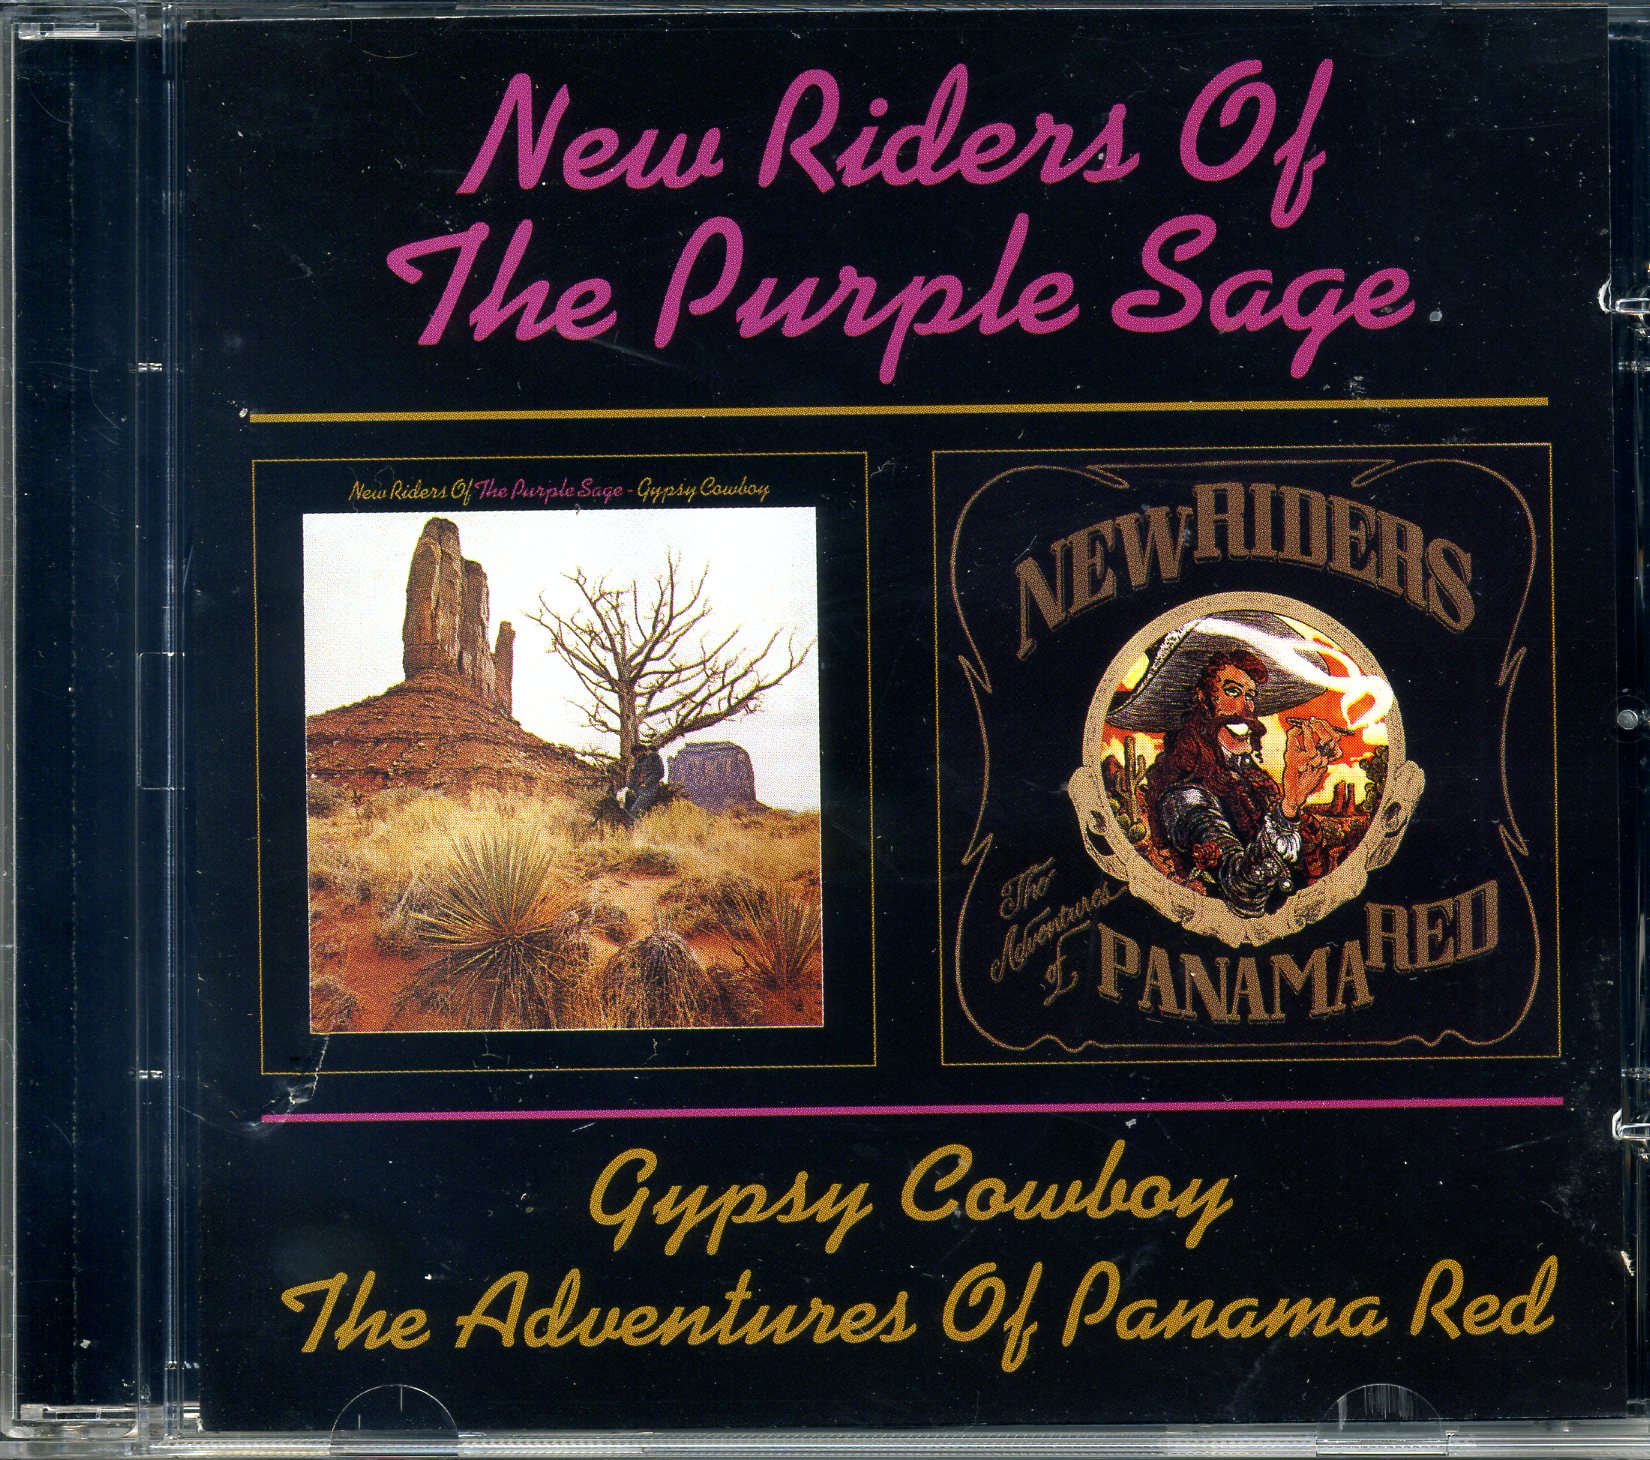 NEW RIDERS OF THE PURPLE SAGE